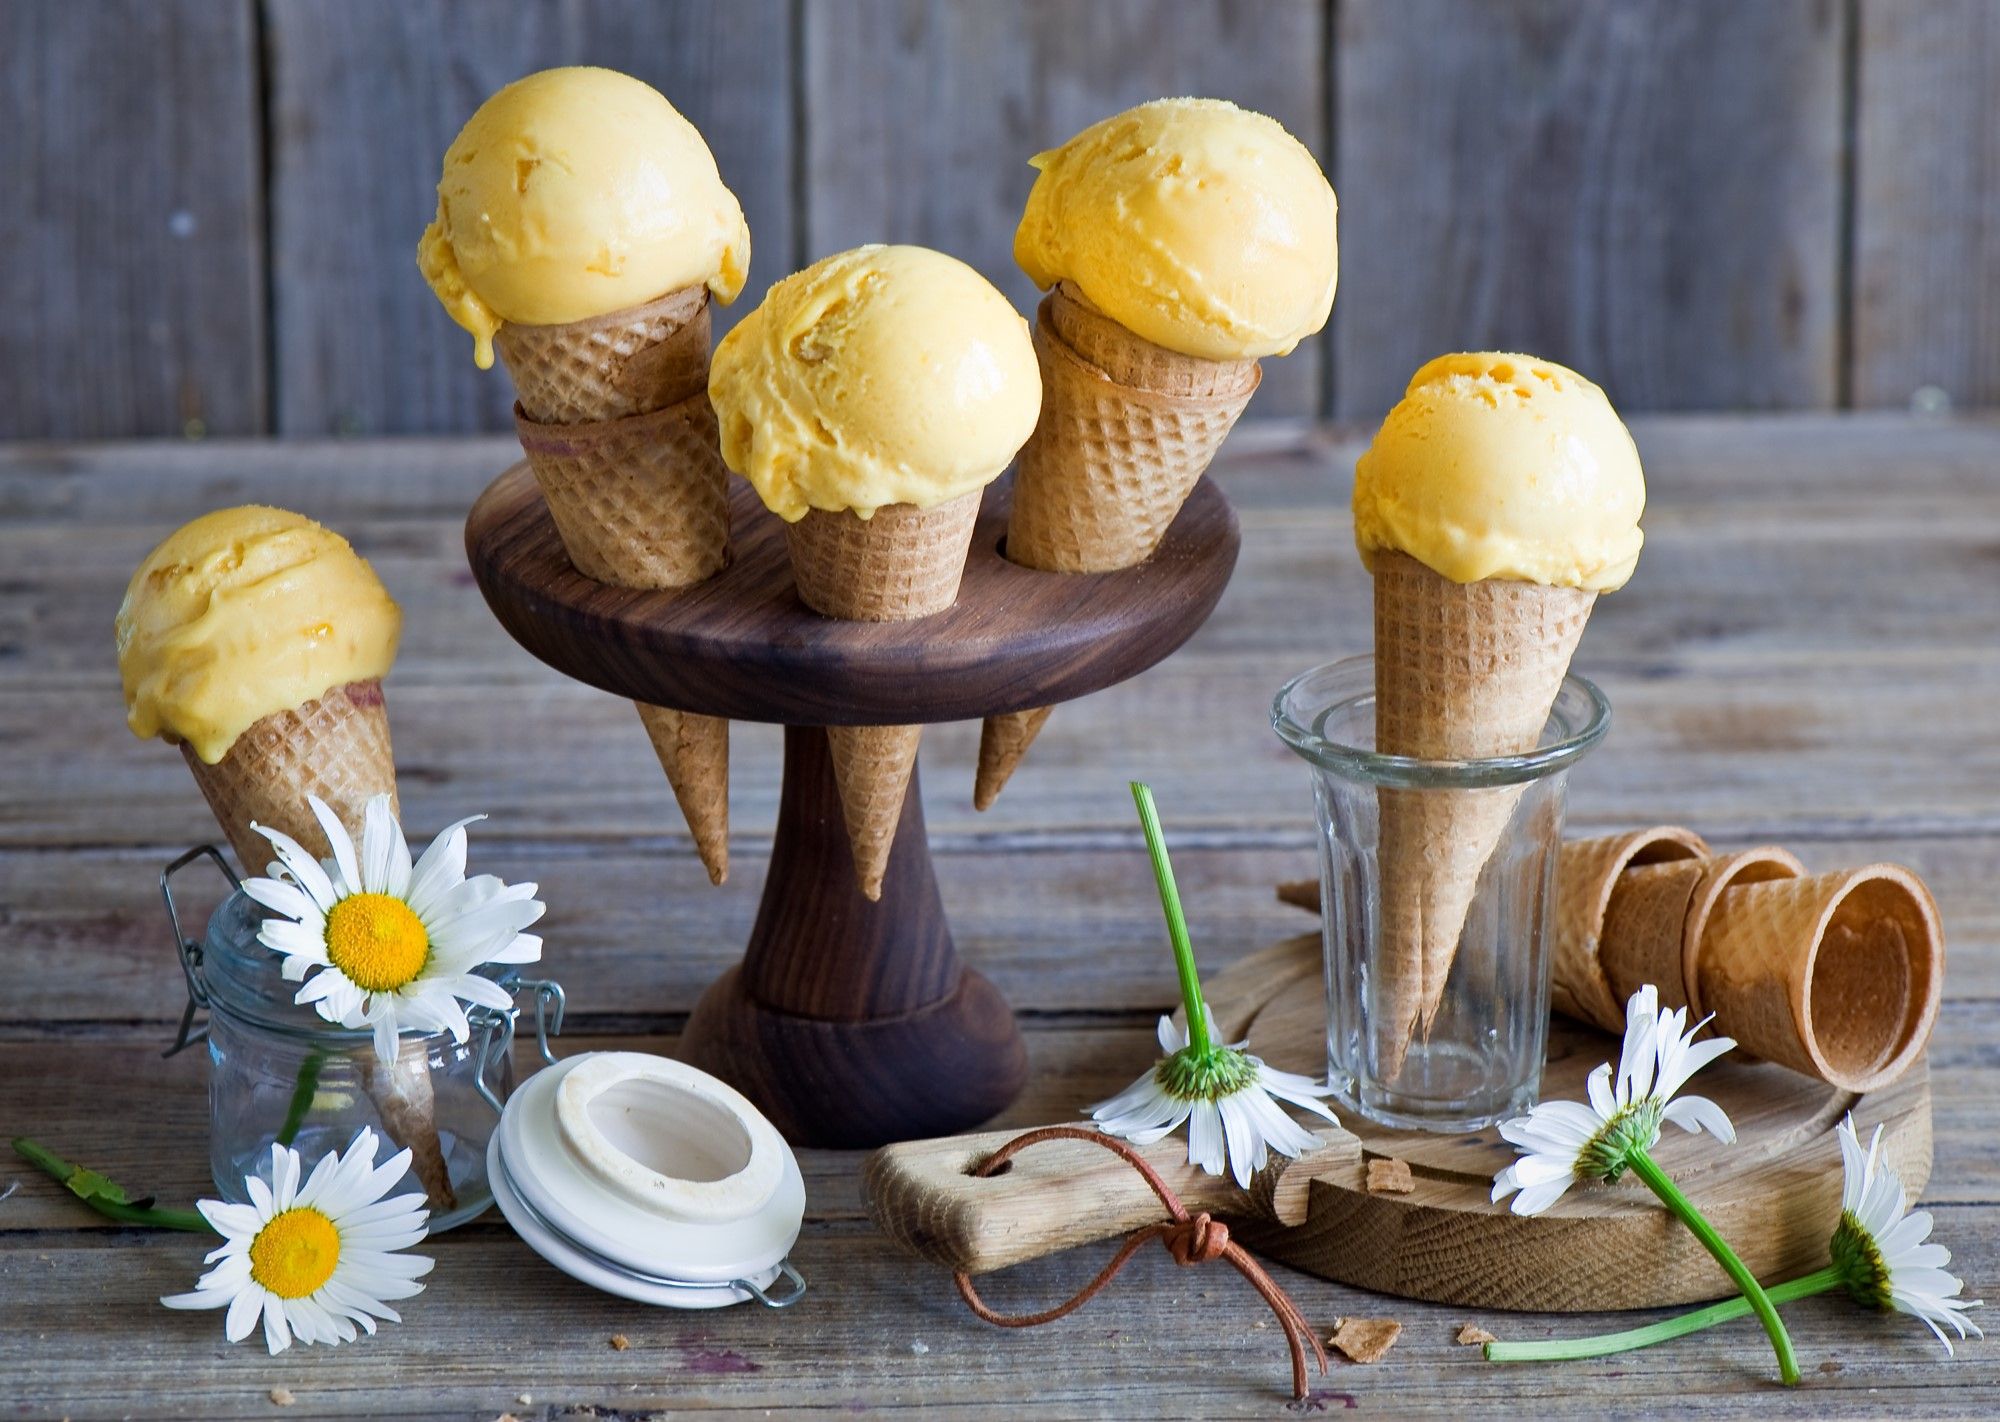 A table with ice cream cones and flowers - Ice cream